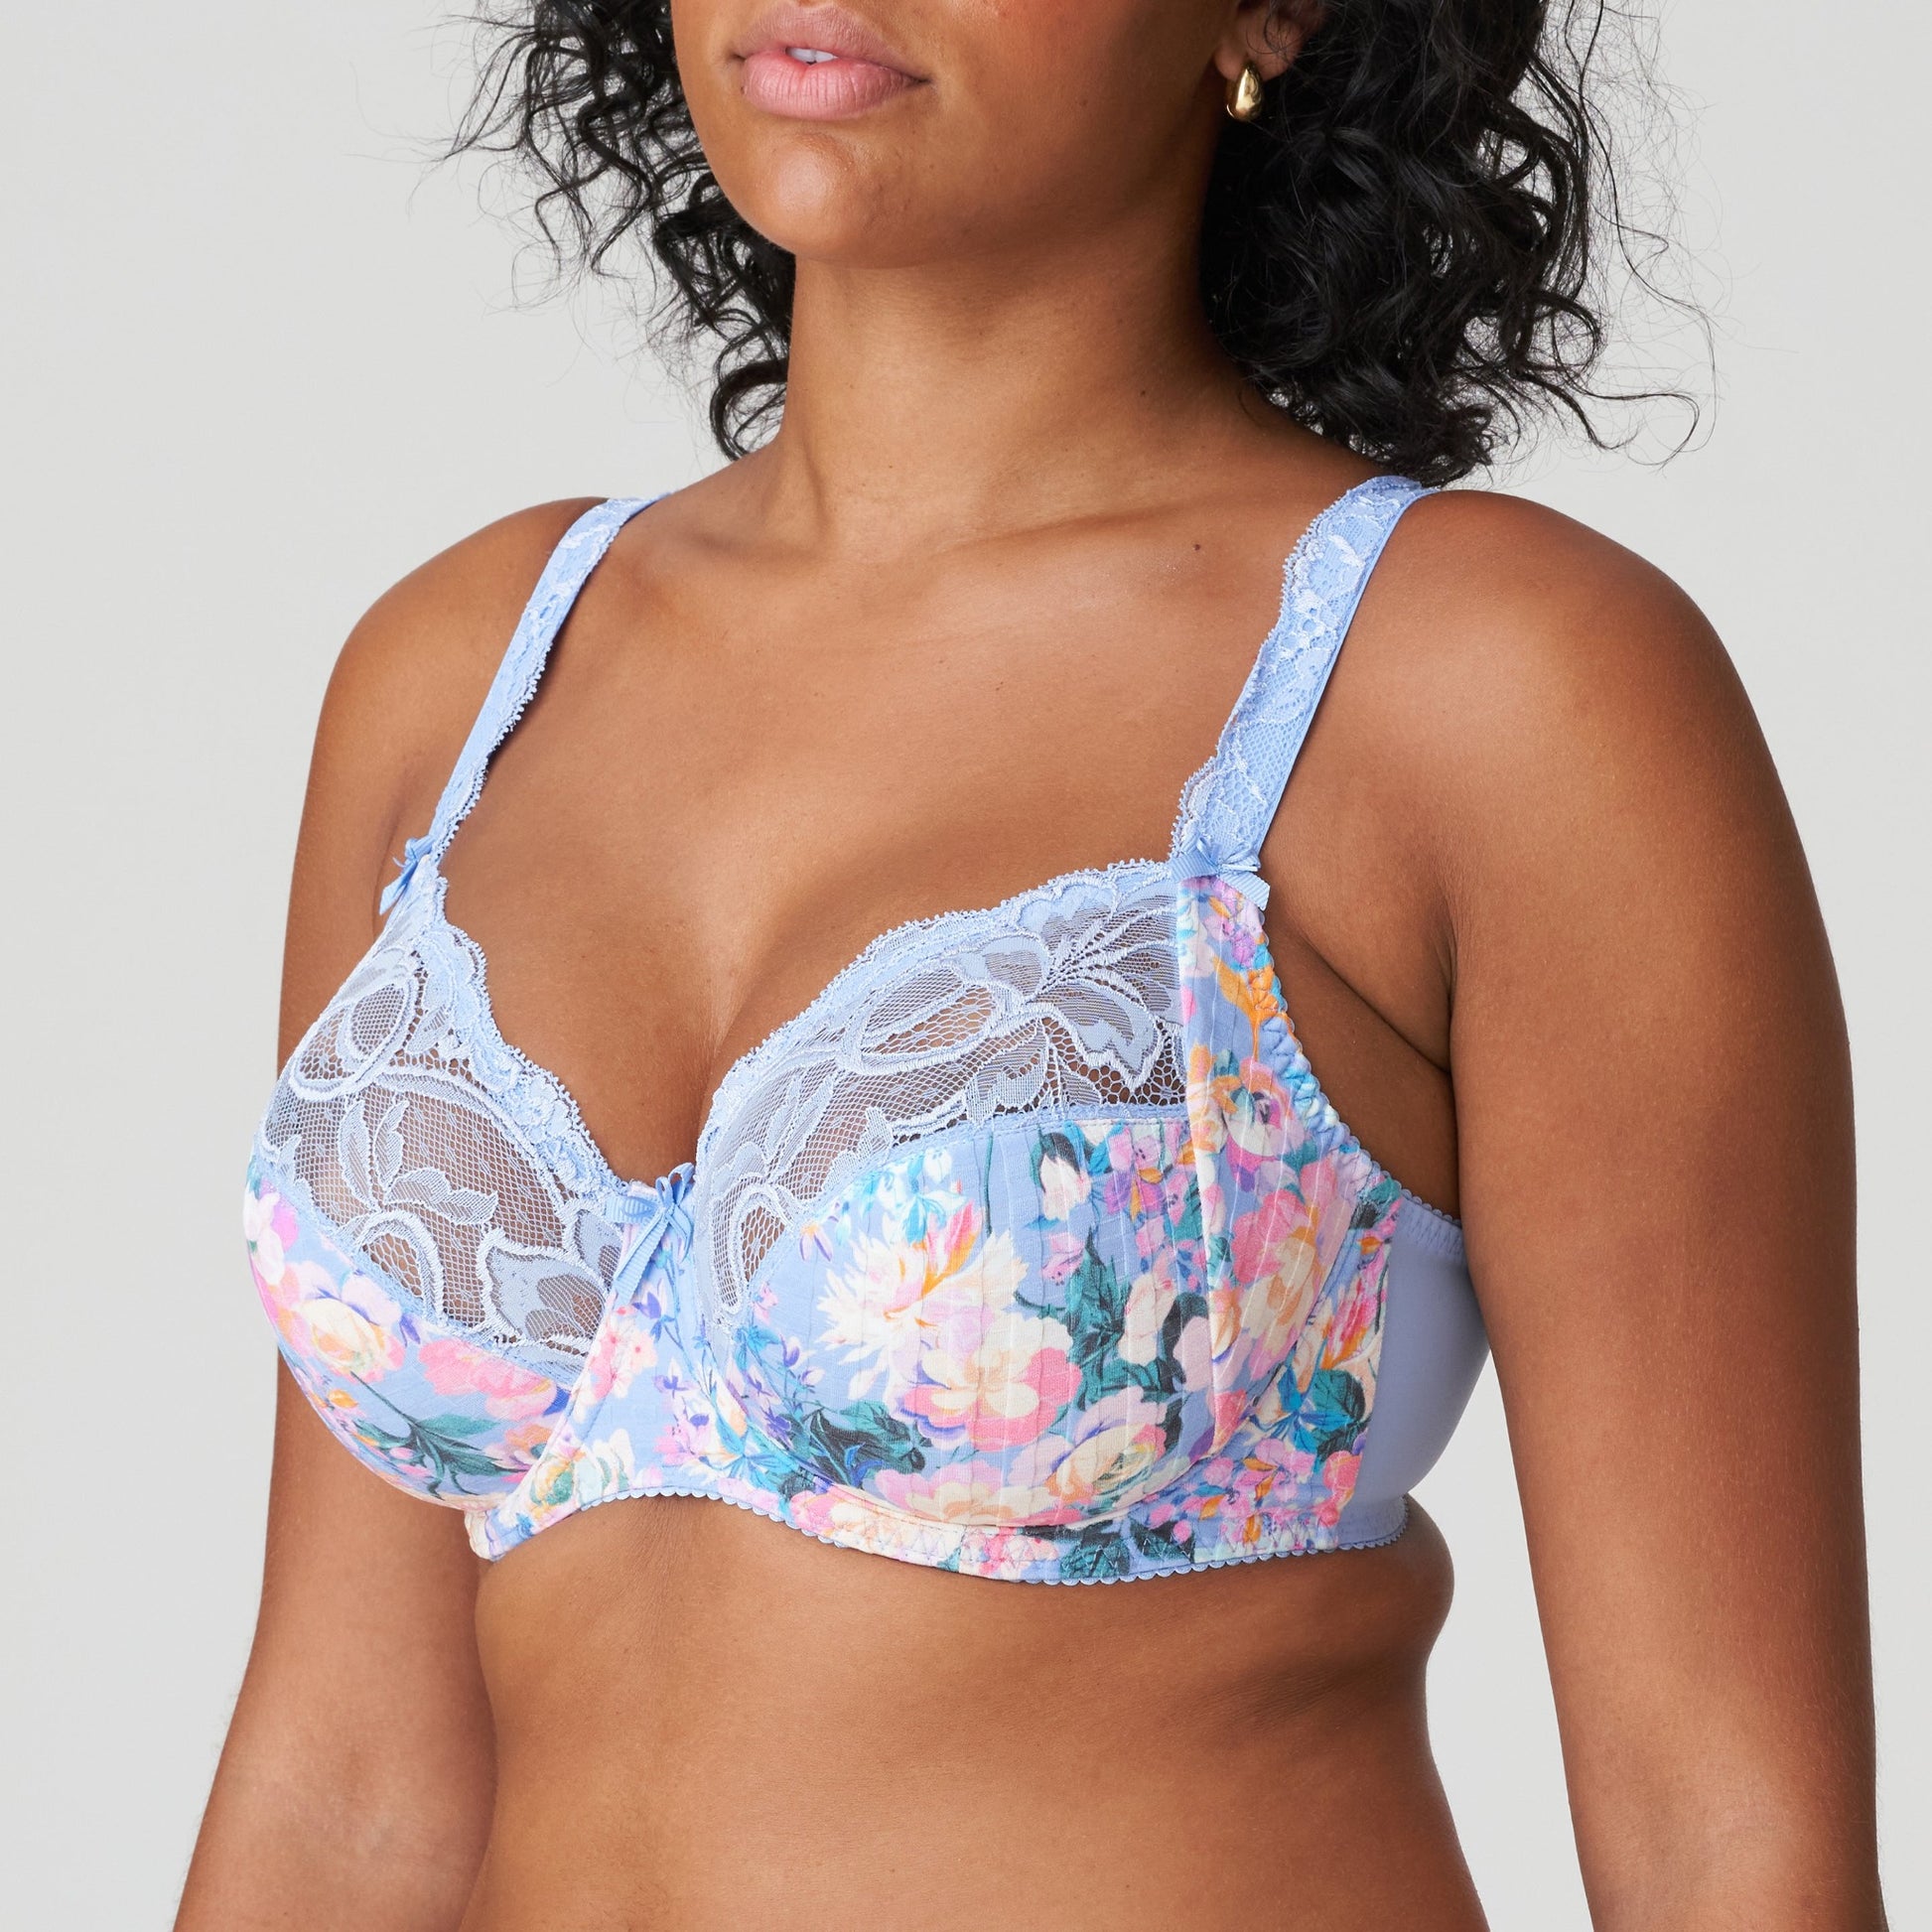 Side view of a woman wearing the DD+ Madison Full Cup Bra in Periwinkle Floral by PrimaDonna.